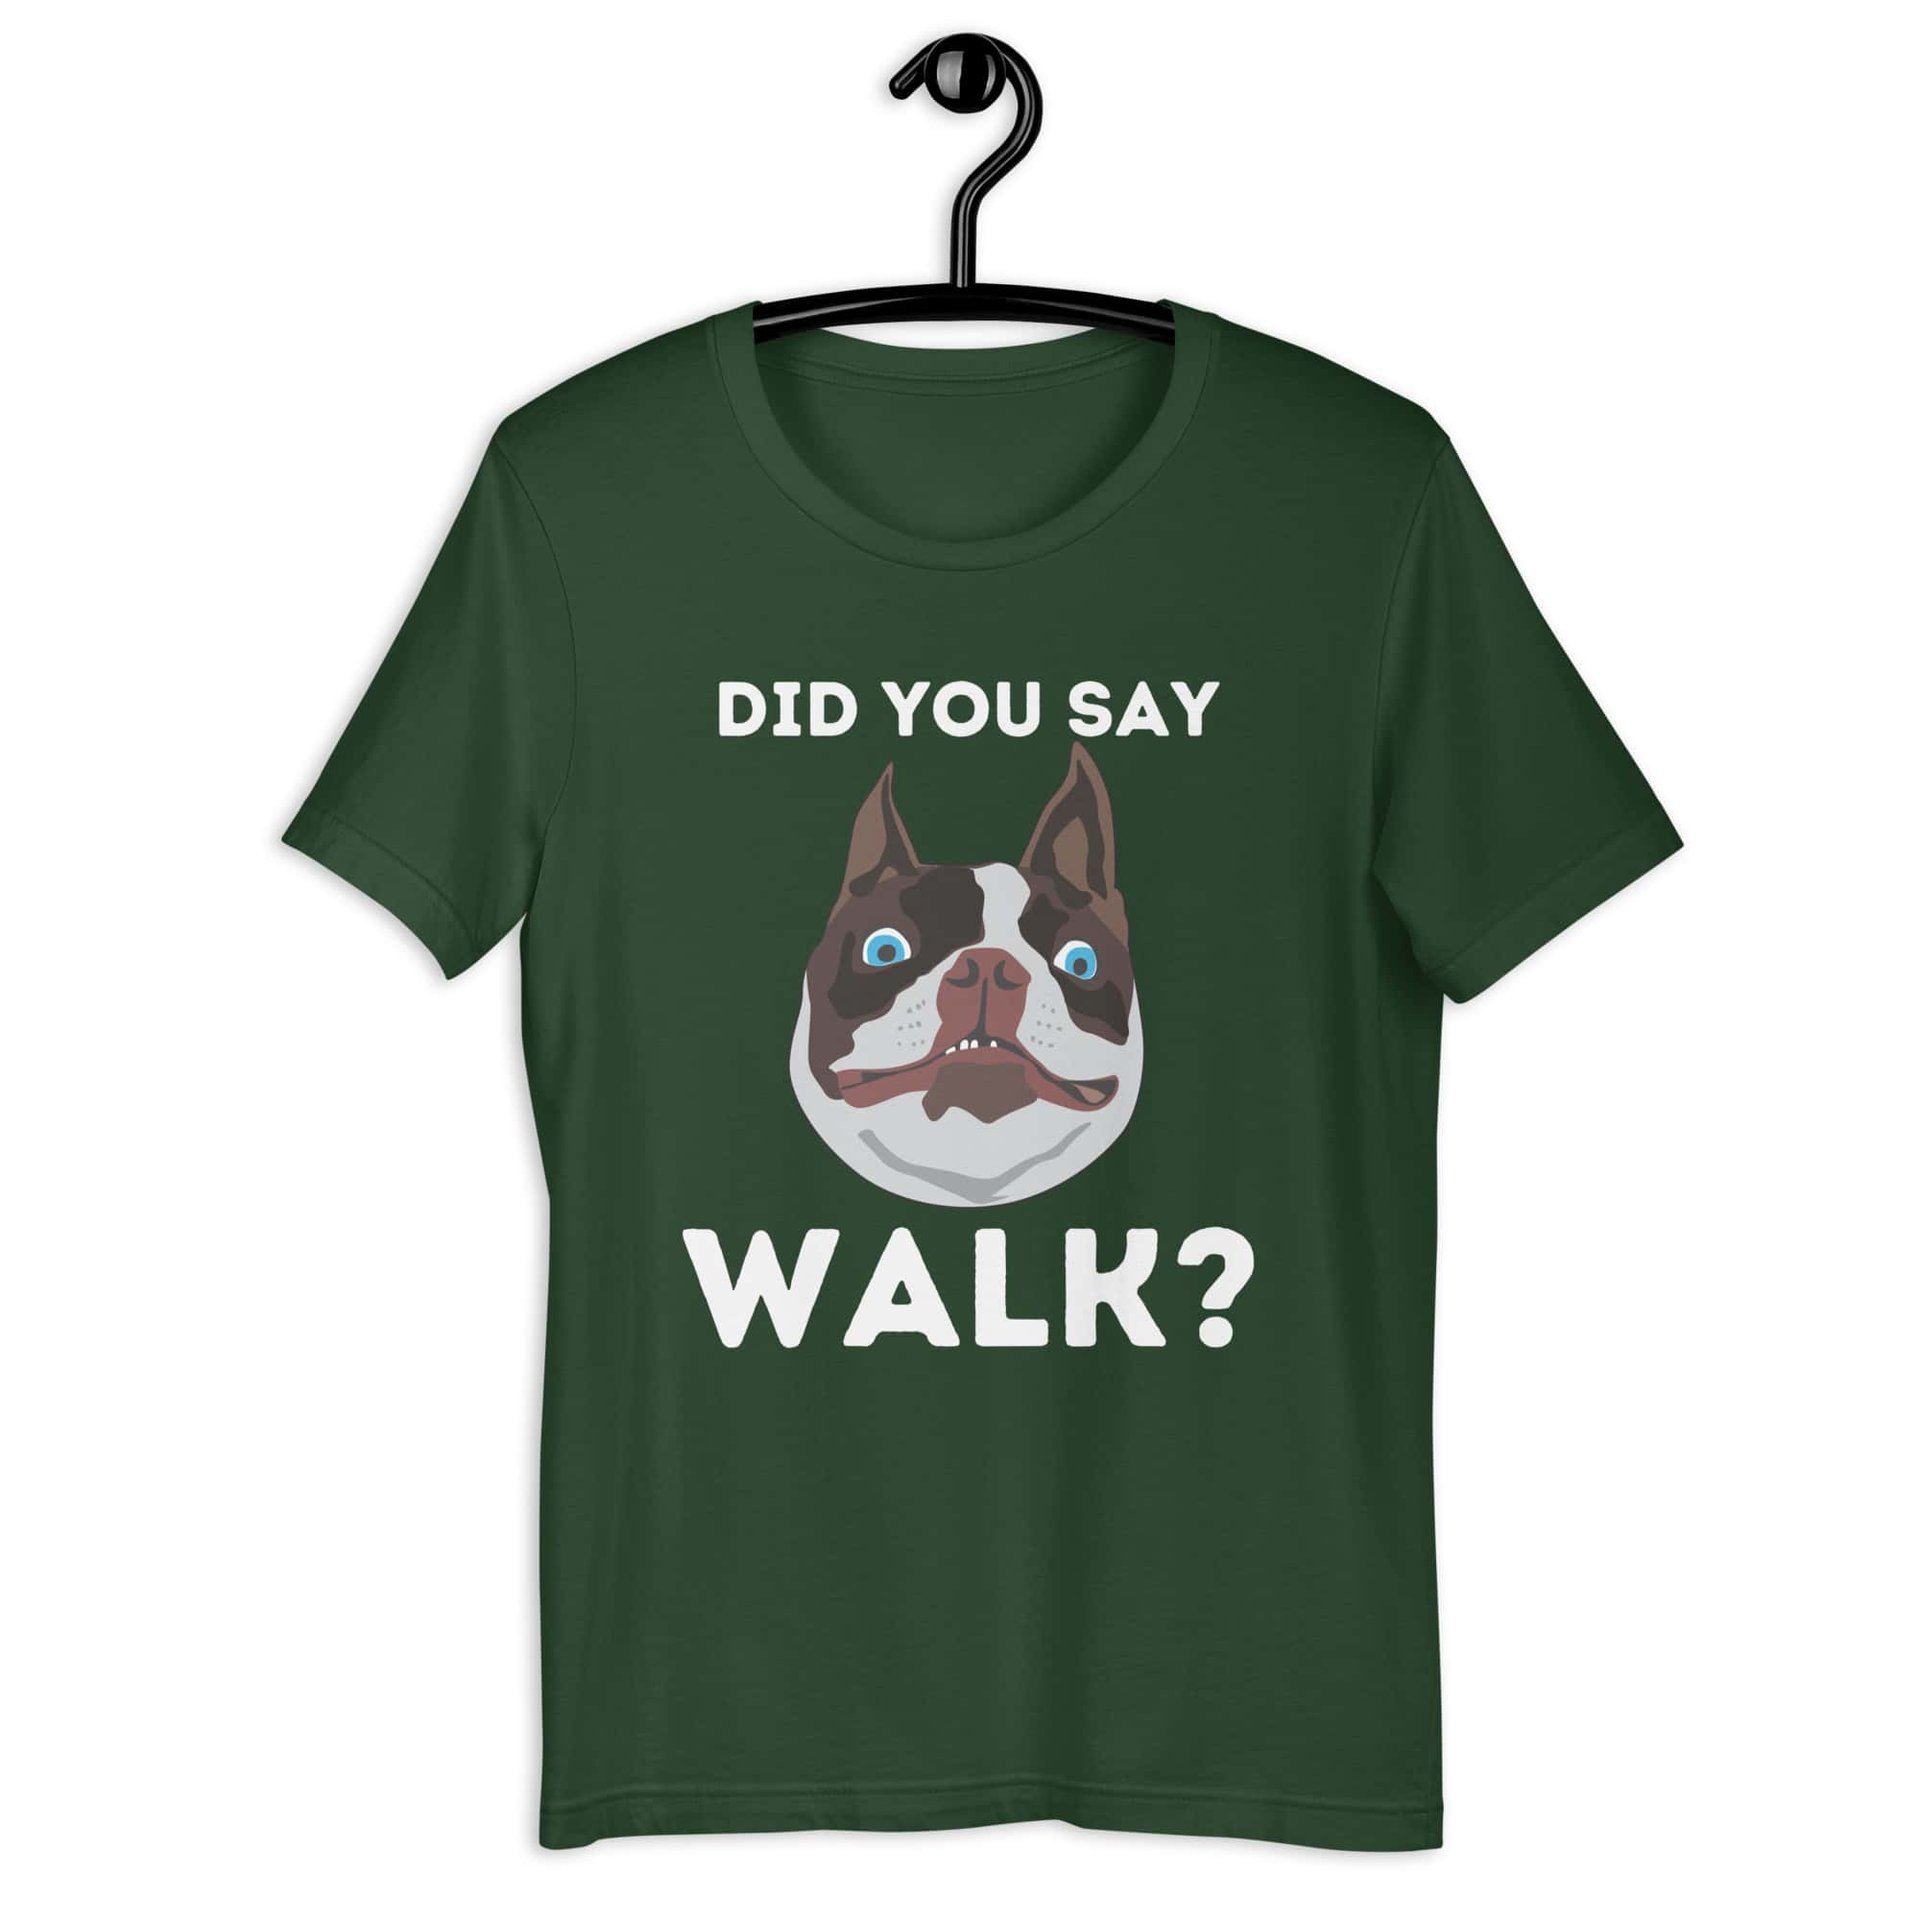 "Did You Say Walk?" Funny Dog Unisex T-Shirt. Forest